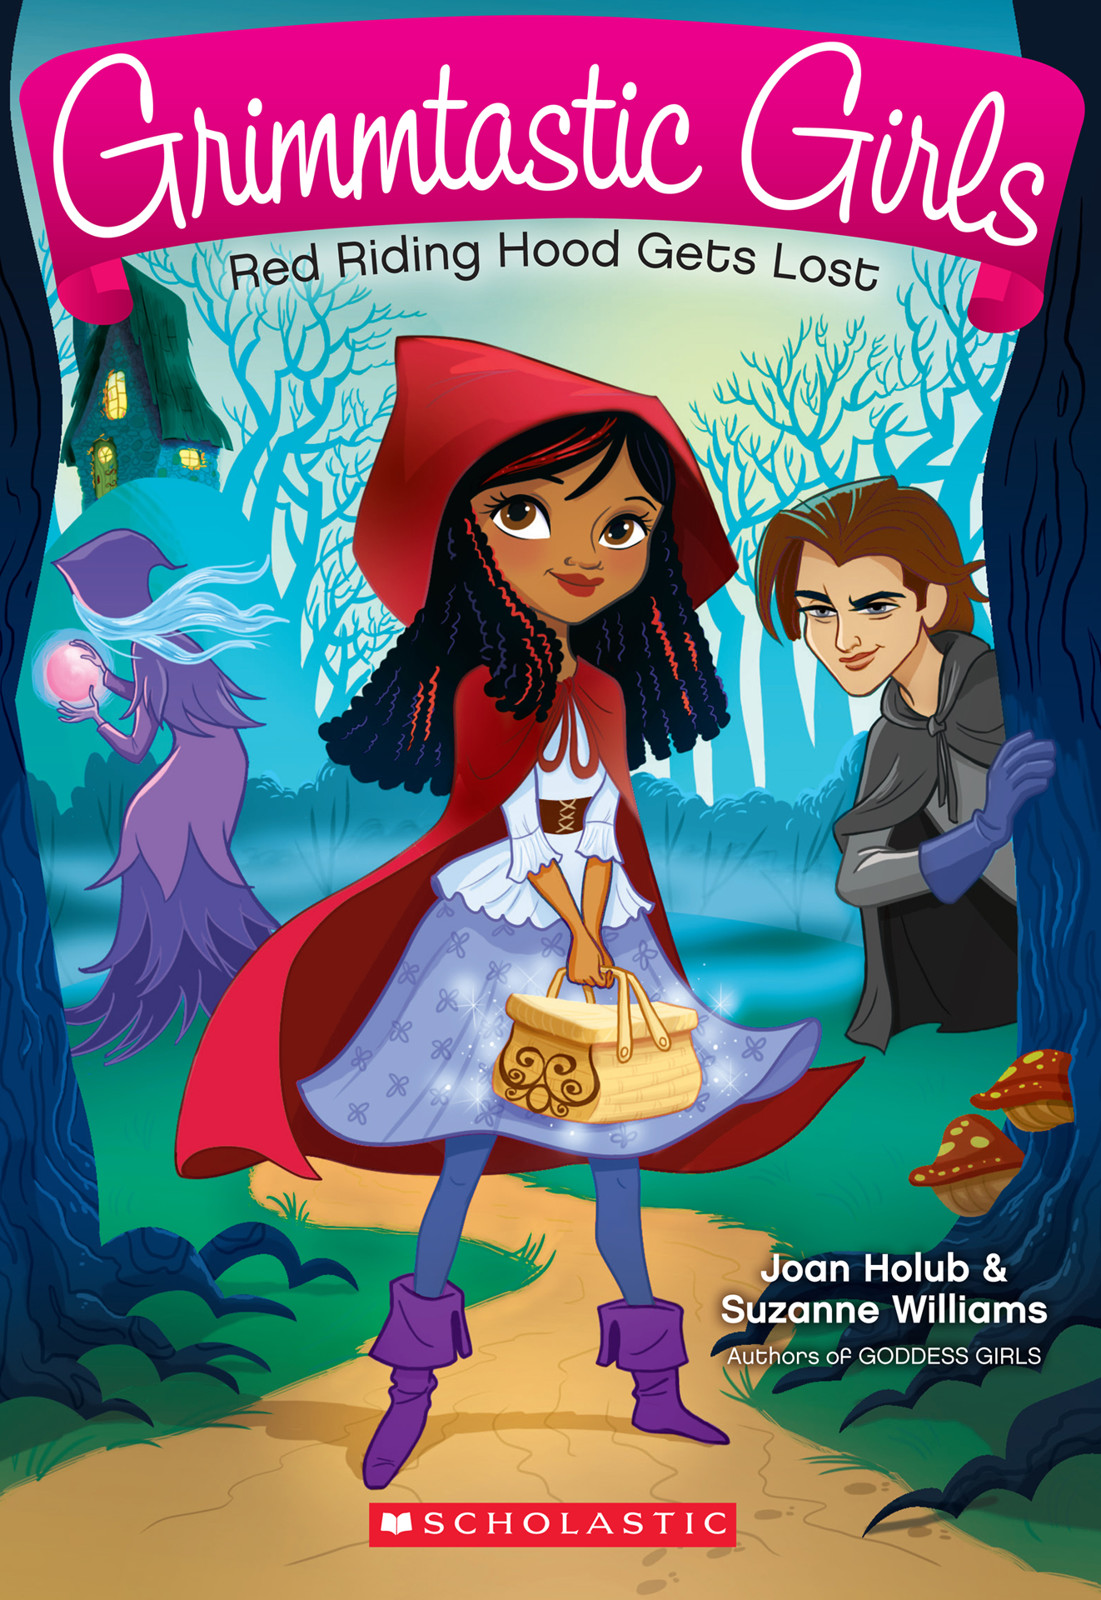 Red Riding Hood Gets Lost